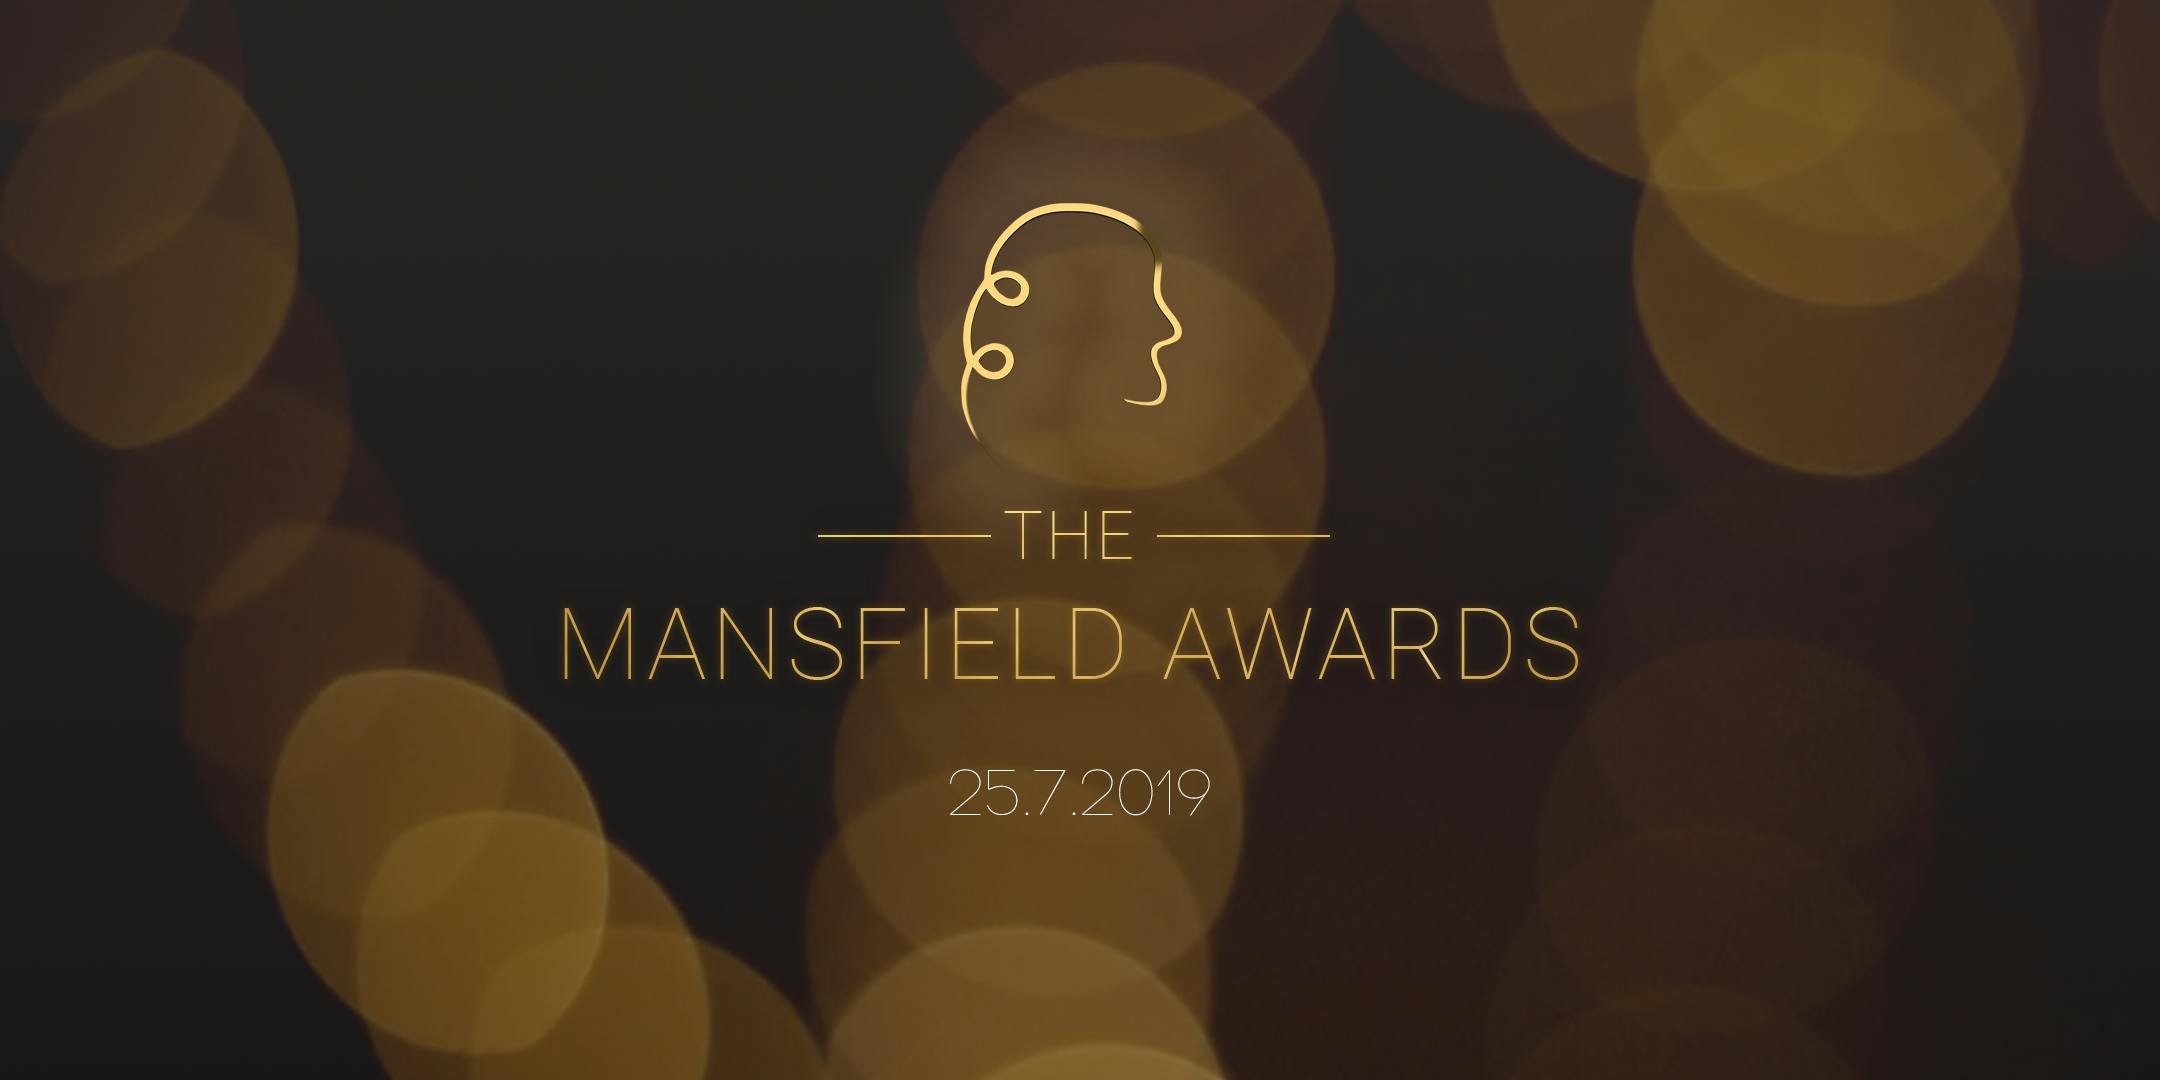 The Mansfield Awards 2019 - Recognising Claims Excellence